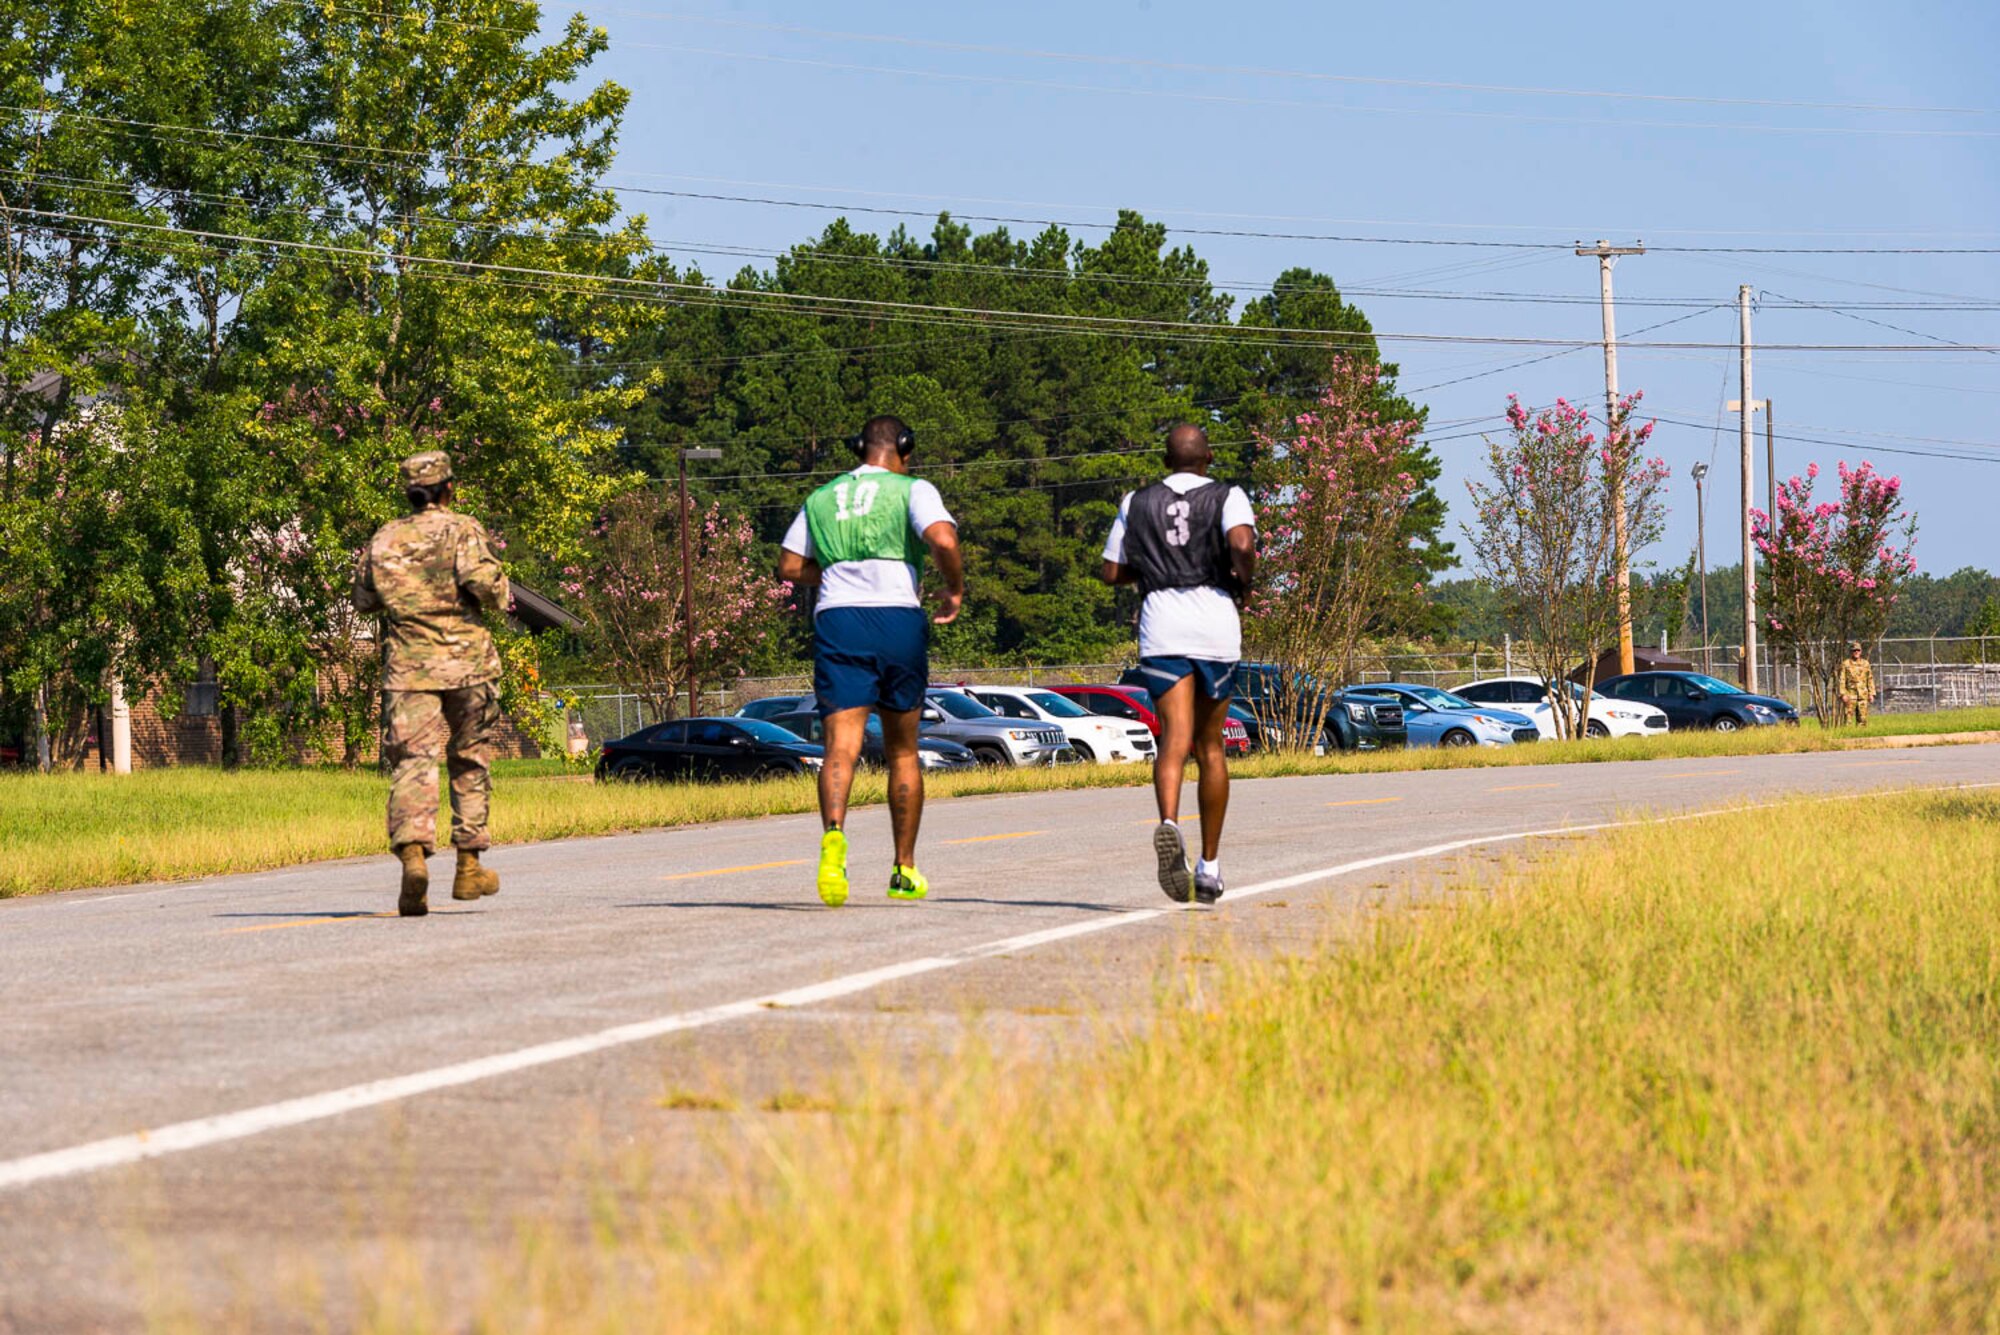 An Airman assigned to the 96th Aerial Port Squadron and supportive wingmen finishes the run portion of an official physical fitness test Sunday, Sept. 8, 2019, at Little Rock Air Force Base, Ark. Over the drill weekend, the unit fitness program manager and physical training leaders evaluated more than 100 Airmen to ensure annual readiness requirements were upheld. The Air Force Reserve’s overall readiness depends on the individual readiness of each Reserve Citizen Airman. (U.S. Air Force Reserve photo by Maj. Ashley Walker)